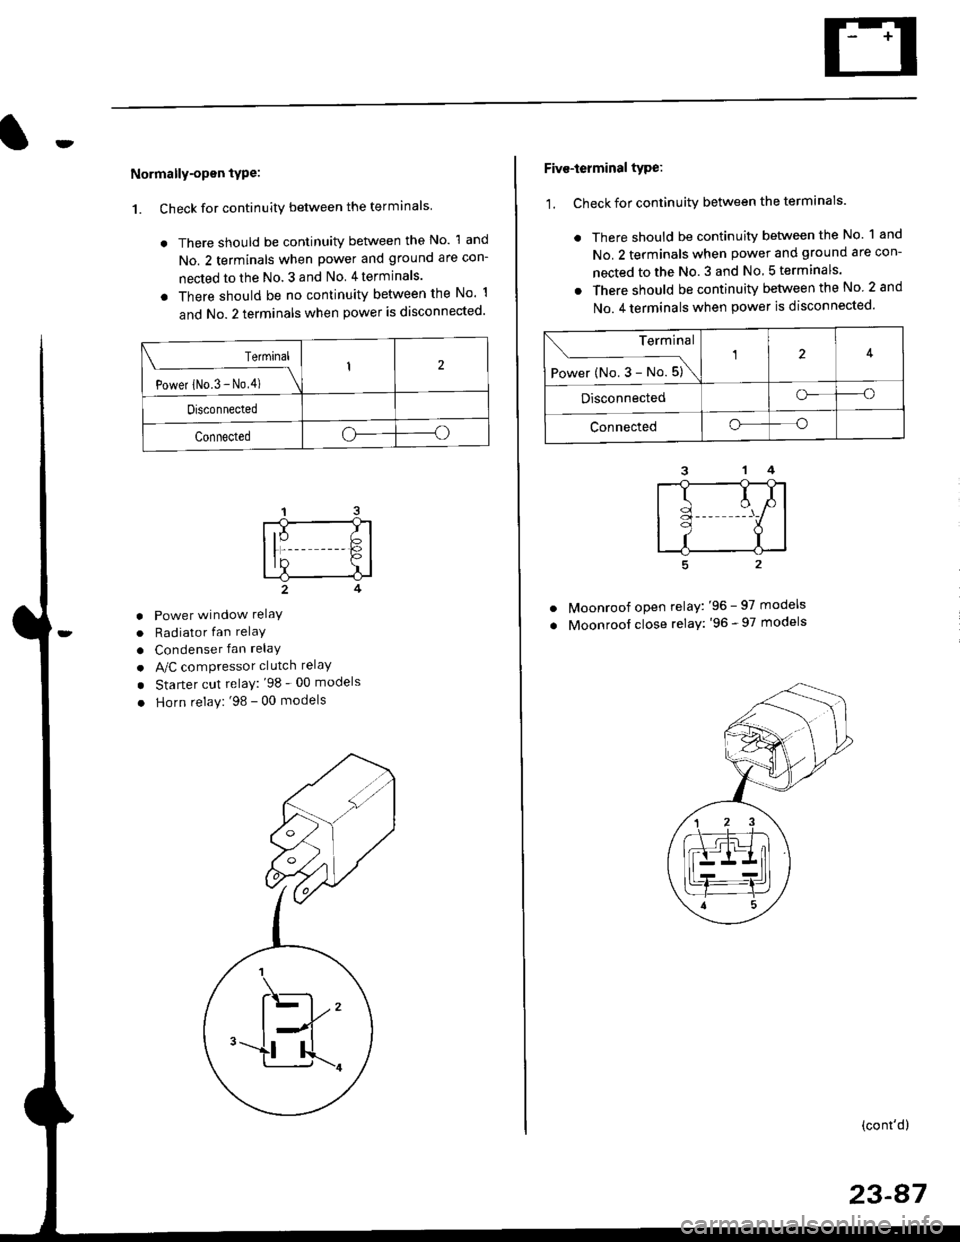 HONDA CIVIC 1998 6.G Workshop Manual Normally-opsn tYPe:
1. Check for continuity between the terminals
. There should be continuity between the No. 1 and
No. 2 terminals when power and ground are con-
nected to the No. 3 and No 4terminal